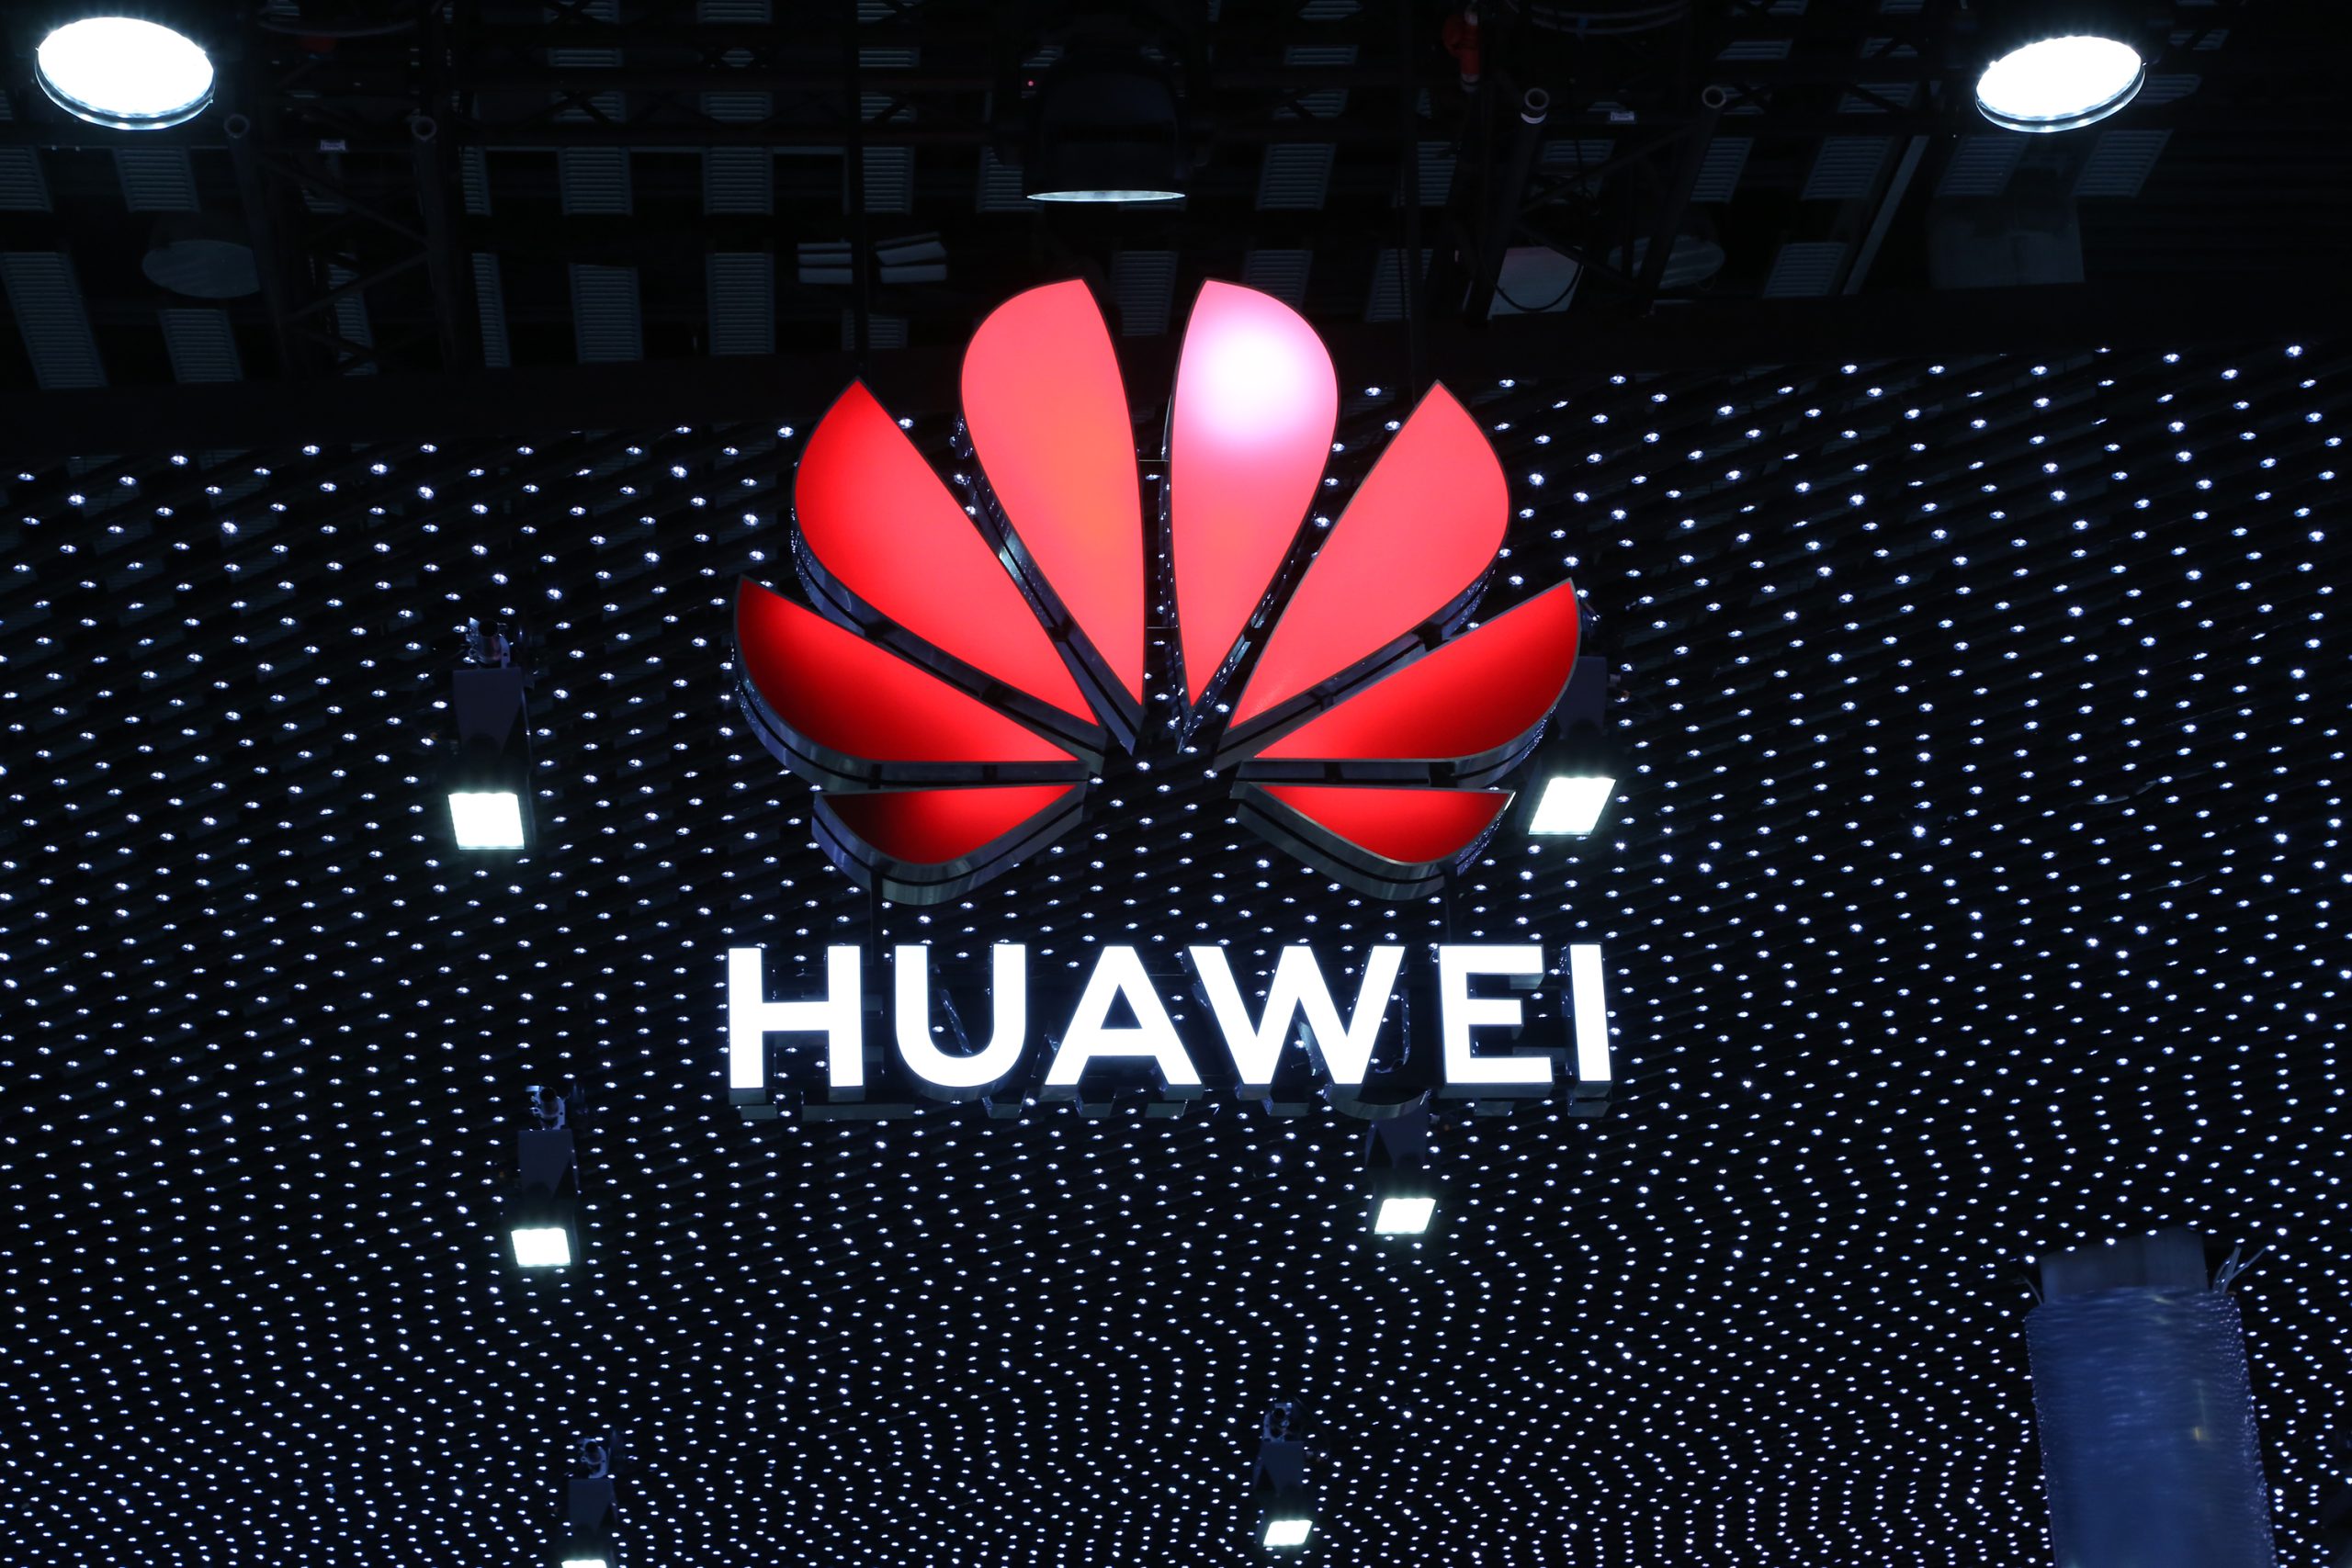 Interview: Huawei’s Jaime Gonzalo on ‘trust and transparency’ despite product bans in several countries